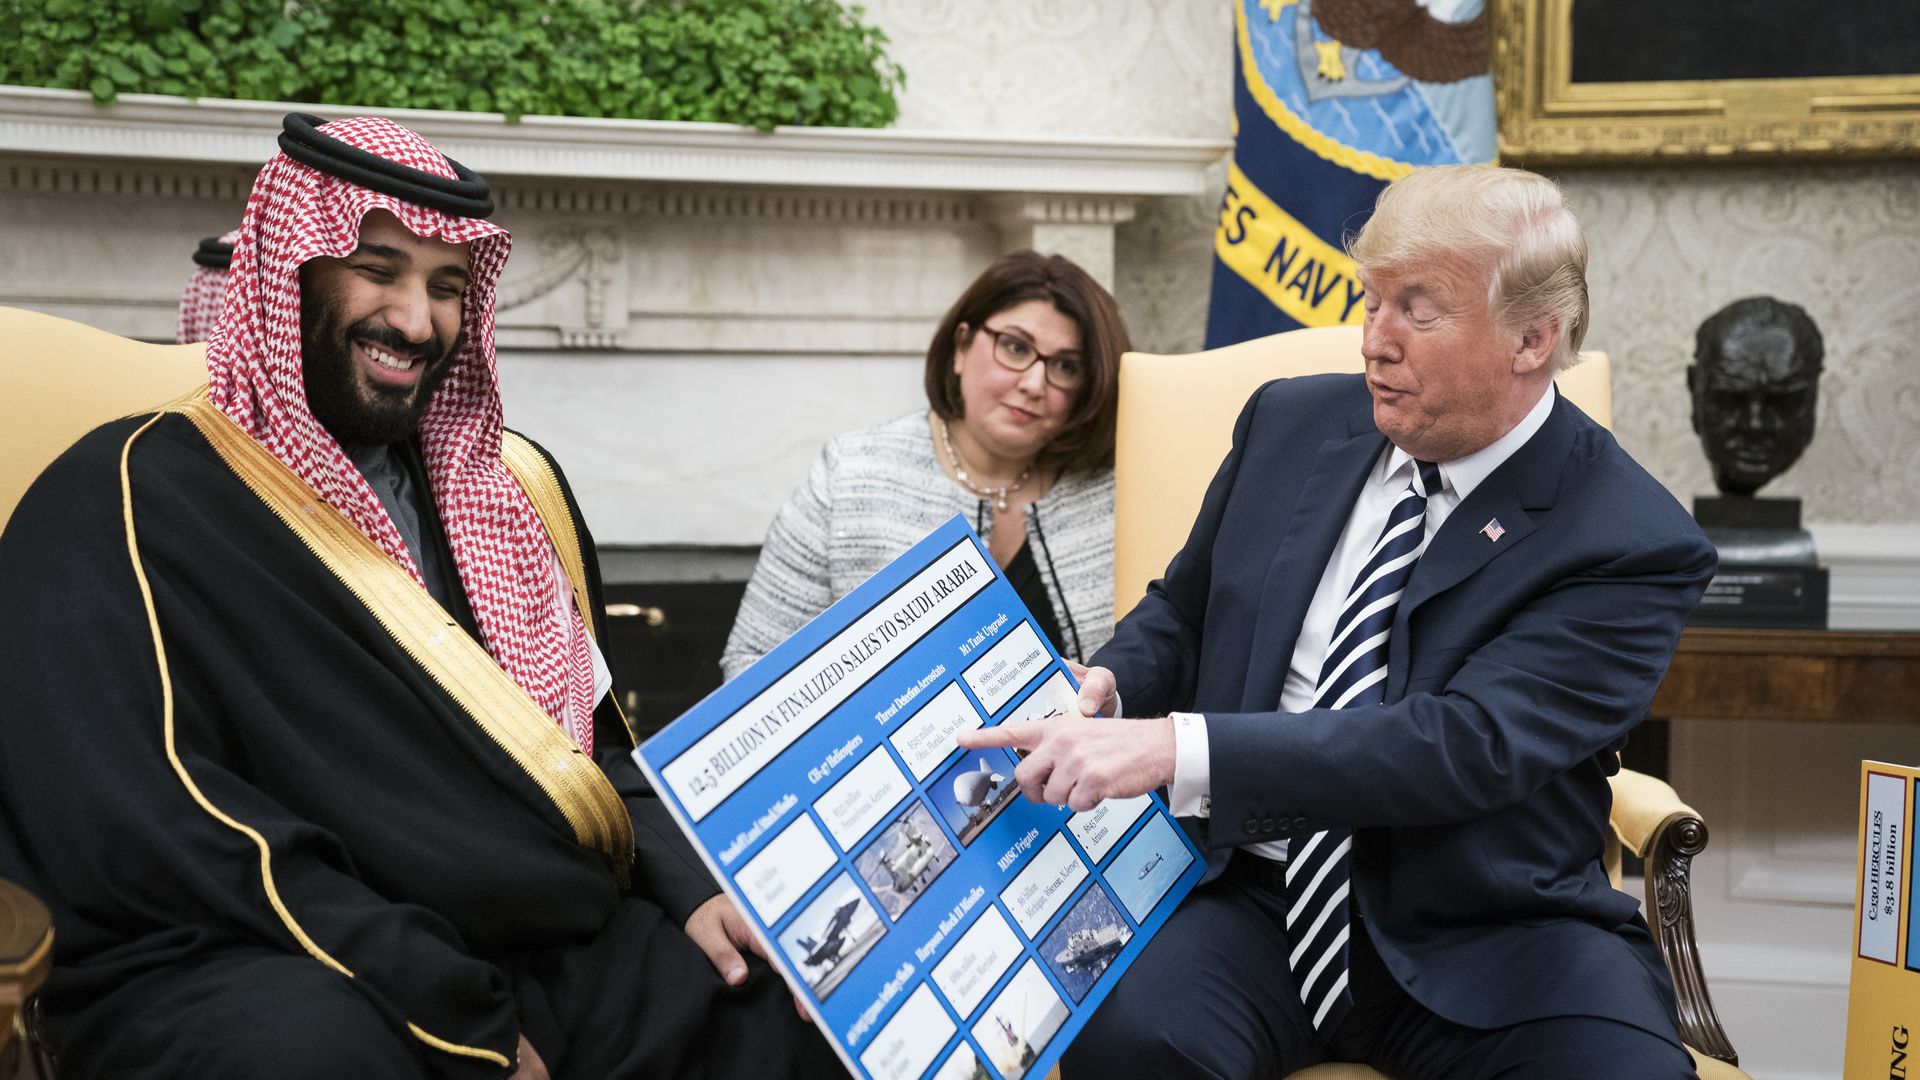 MBS and Trump in Oval Office